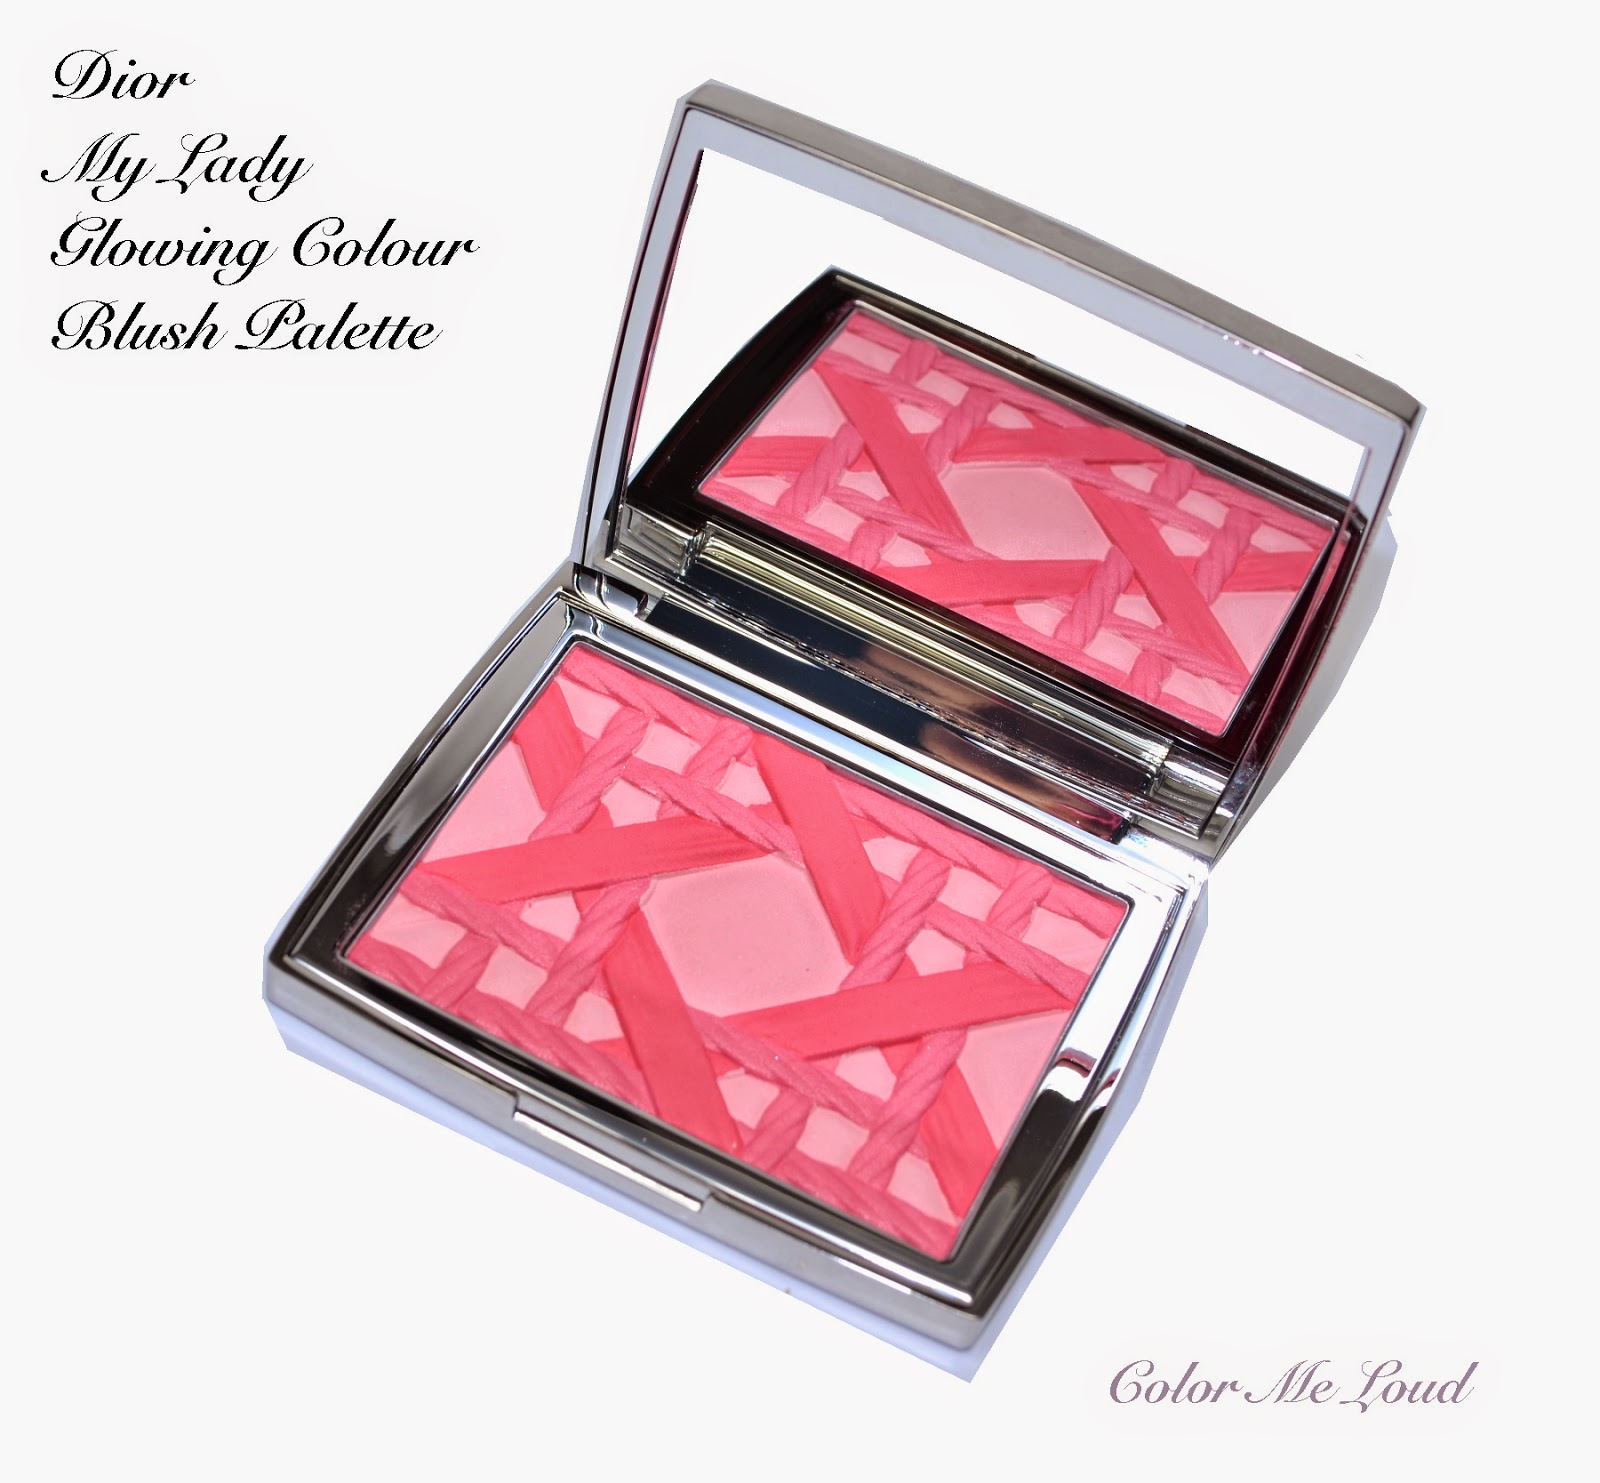 Dior My Lady Glowing Colour Blush Palette in Soft Coral, Review, Swatches & Comparison